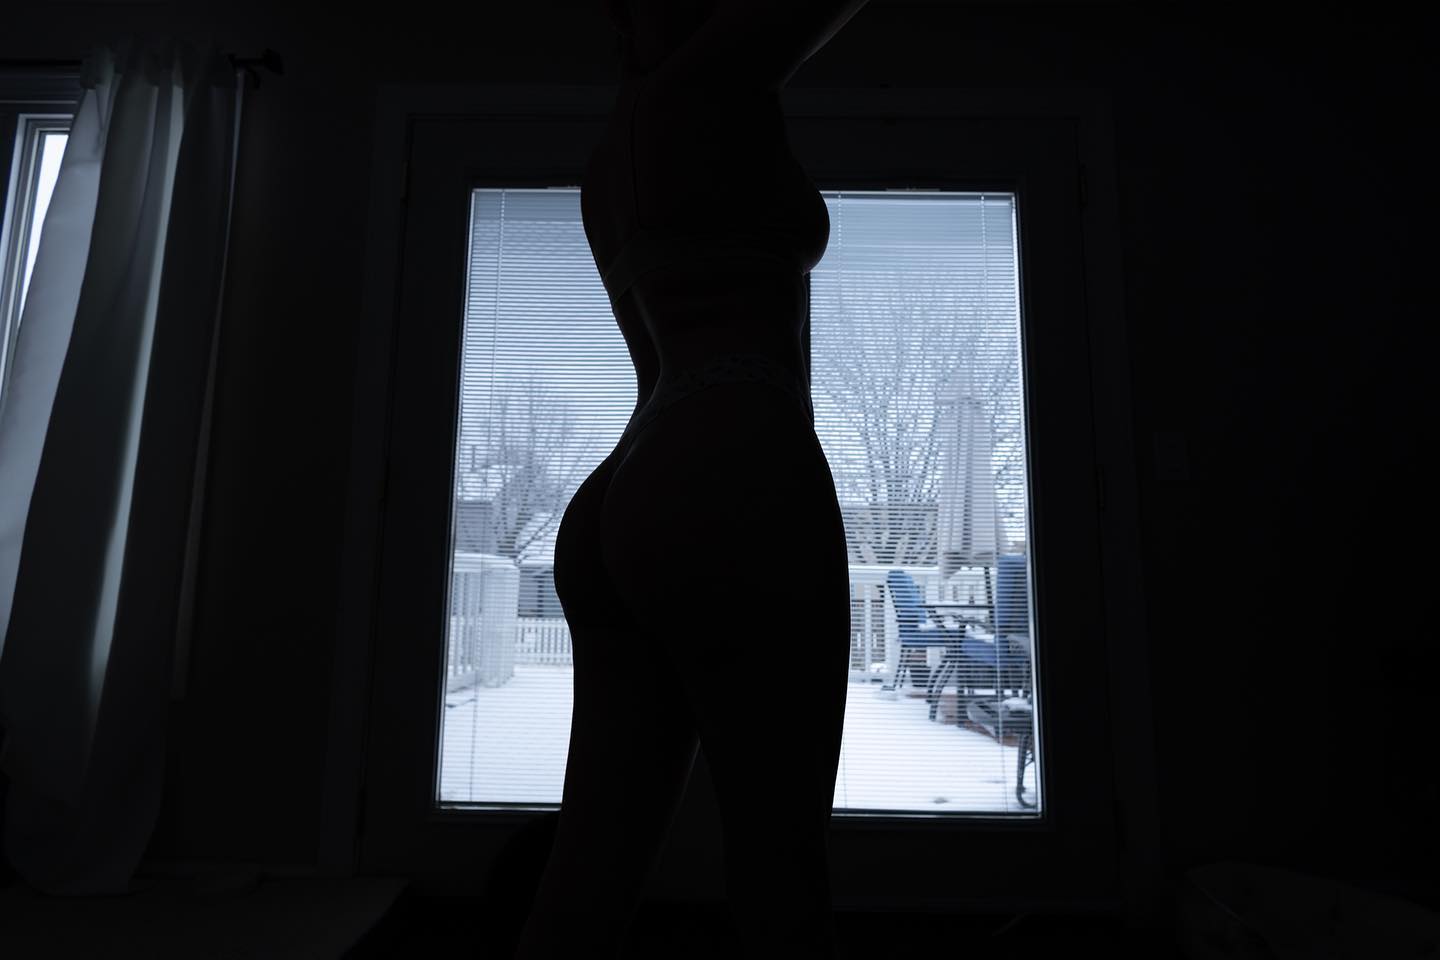 Enjoying the view of the last snowfall
⠀
⠀
⠀
⠀
⠀
⠀
#instagood #photography #boudoirmodel #instadaily #me #body #bodypositive #portraitphotography #beautiful #model #picoftheday  #beauty #happy #photo #silhouette #snow  #photographyeveryday #photooftheday #photoshoot #photographerlife